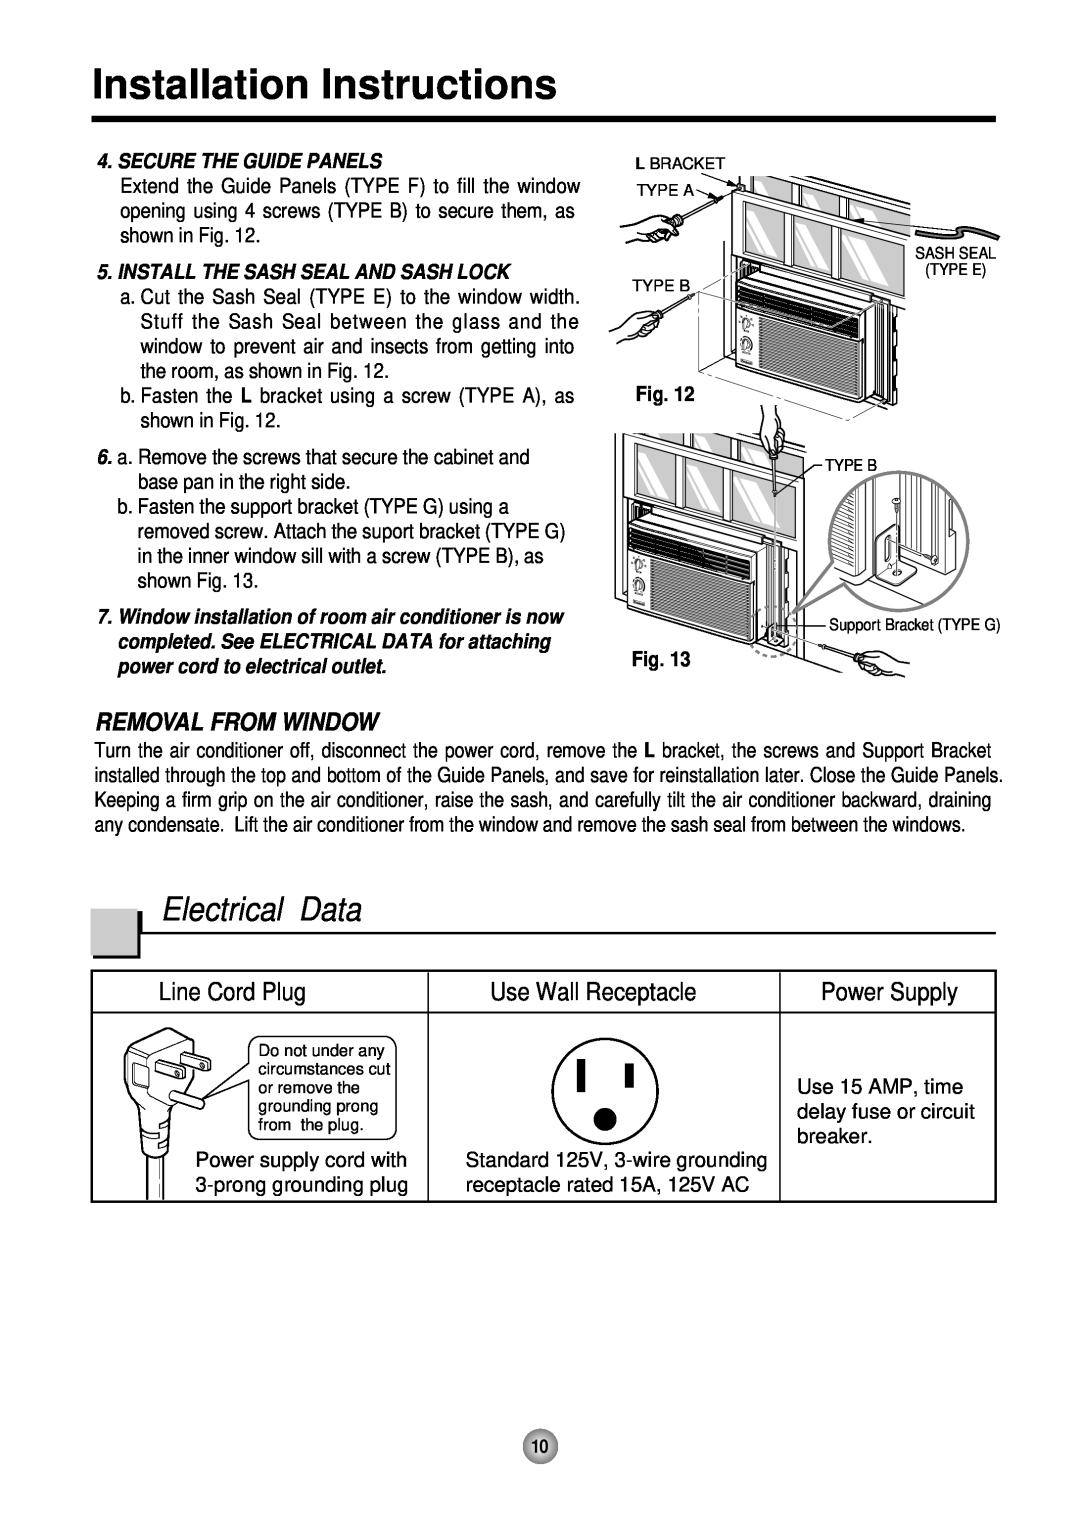 Friedrich ZStar Electrical Data, Removal From Window, Line Cord Plug, Use Wall Receptacle, Power Supply, Fig. Fig 